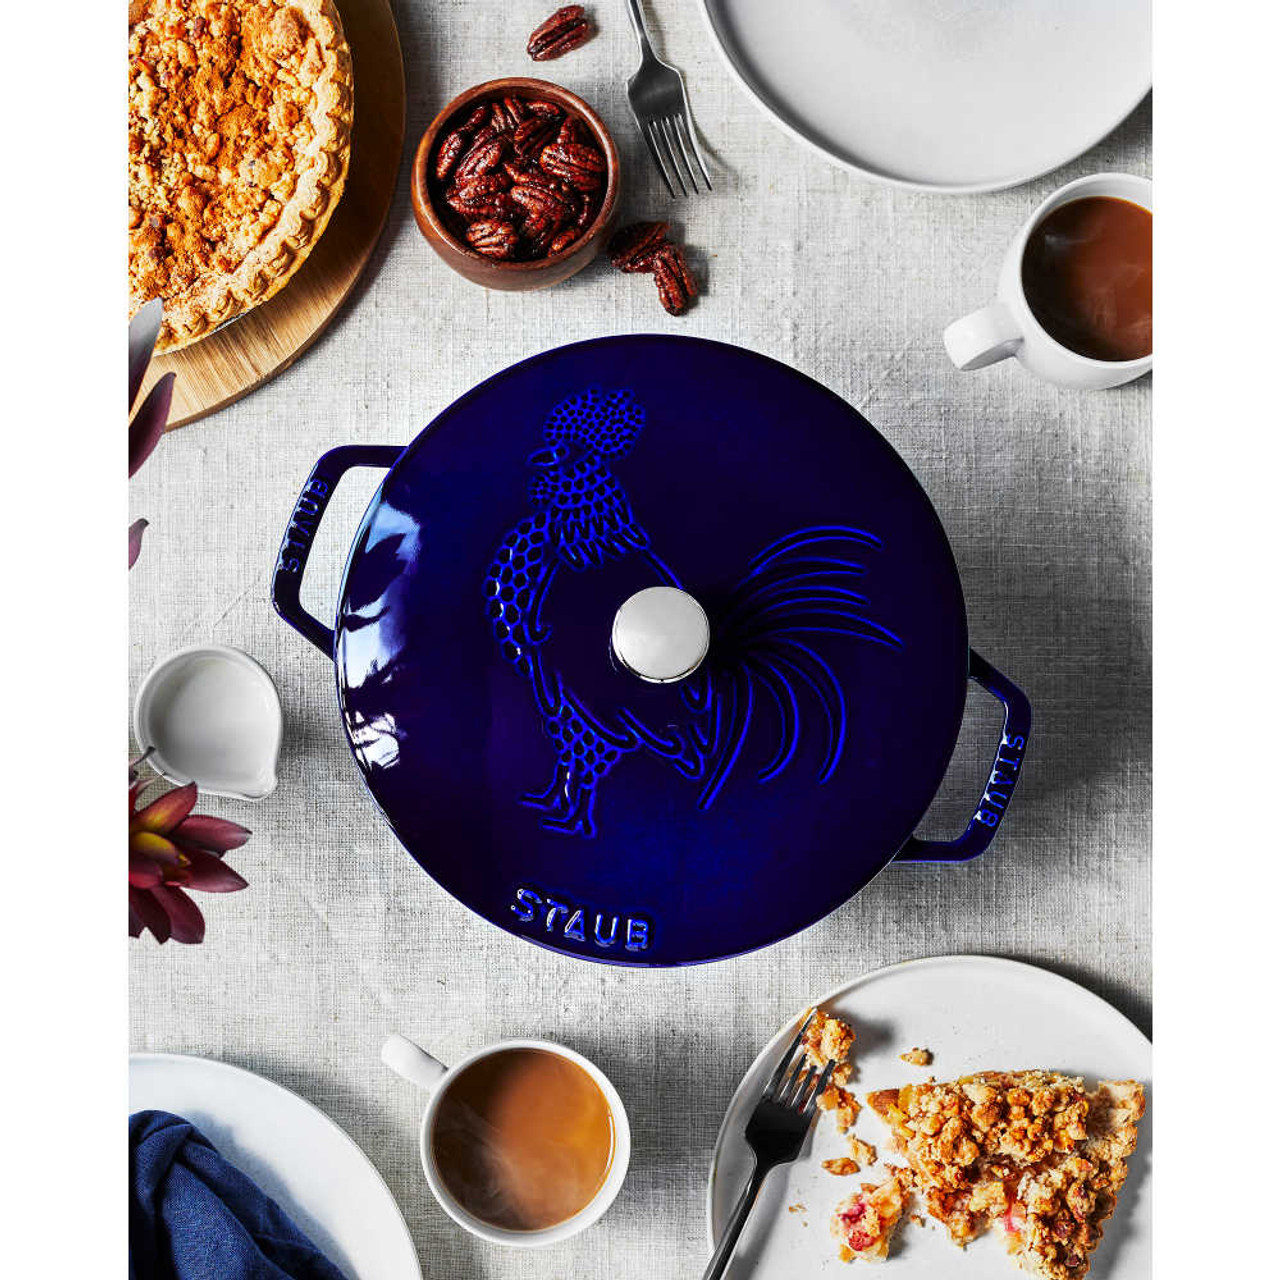 https://cdn11.bigcommerce.com/s-hccytny0od/images/stencil/1280x1280/products/5793/26608/Staub_Cast_Iron_Essential_French_Oven_Rooster_in_Dark_Blue__40320.1702575121.jpg?c=2?imbypass=on